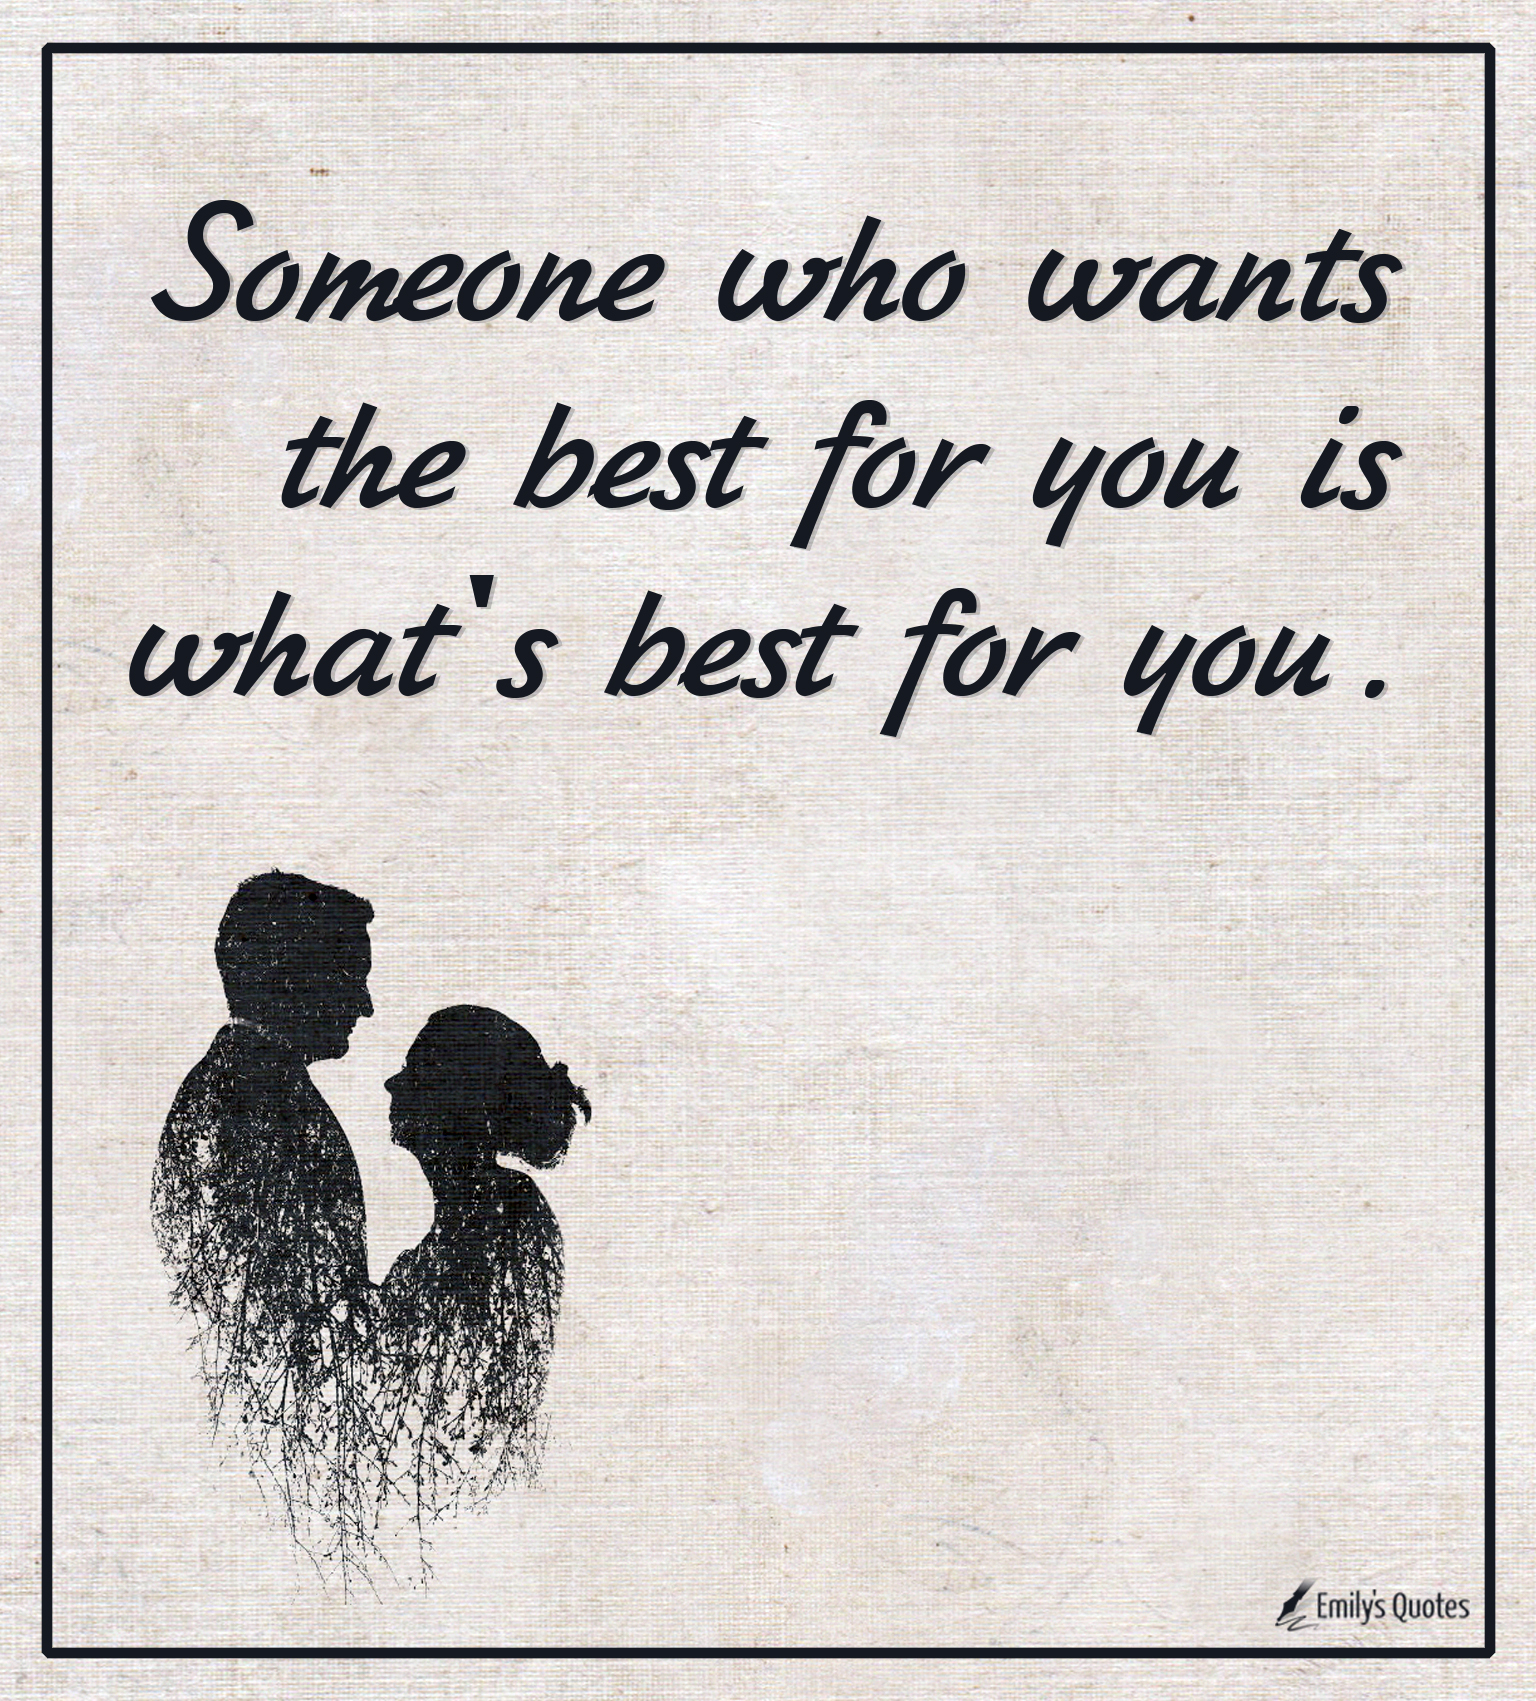 Someone who wants the best for you is what’s best for you